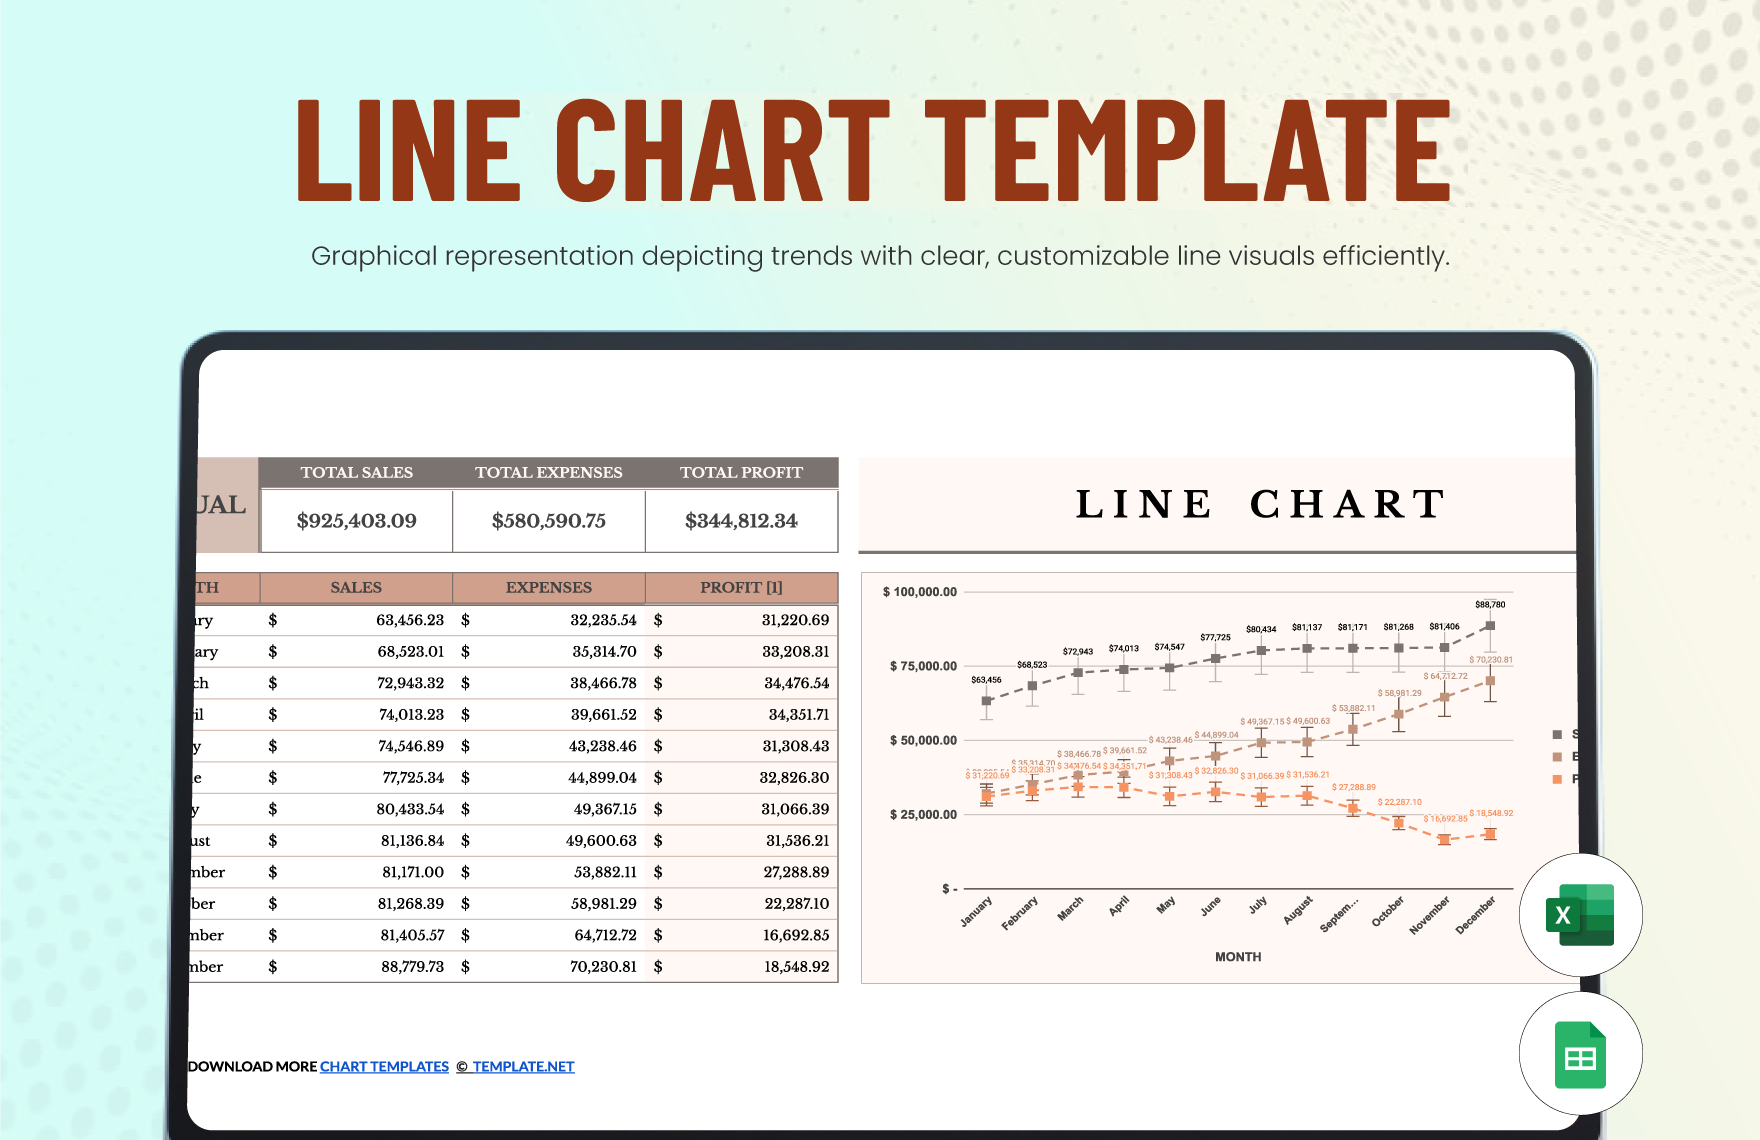 Free Line Chart Template in Excel, Google Sheets